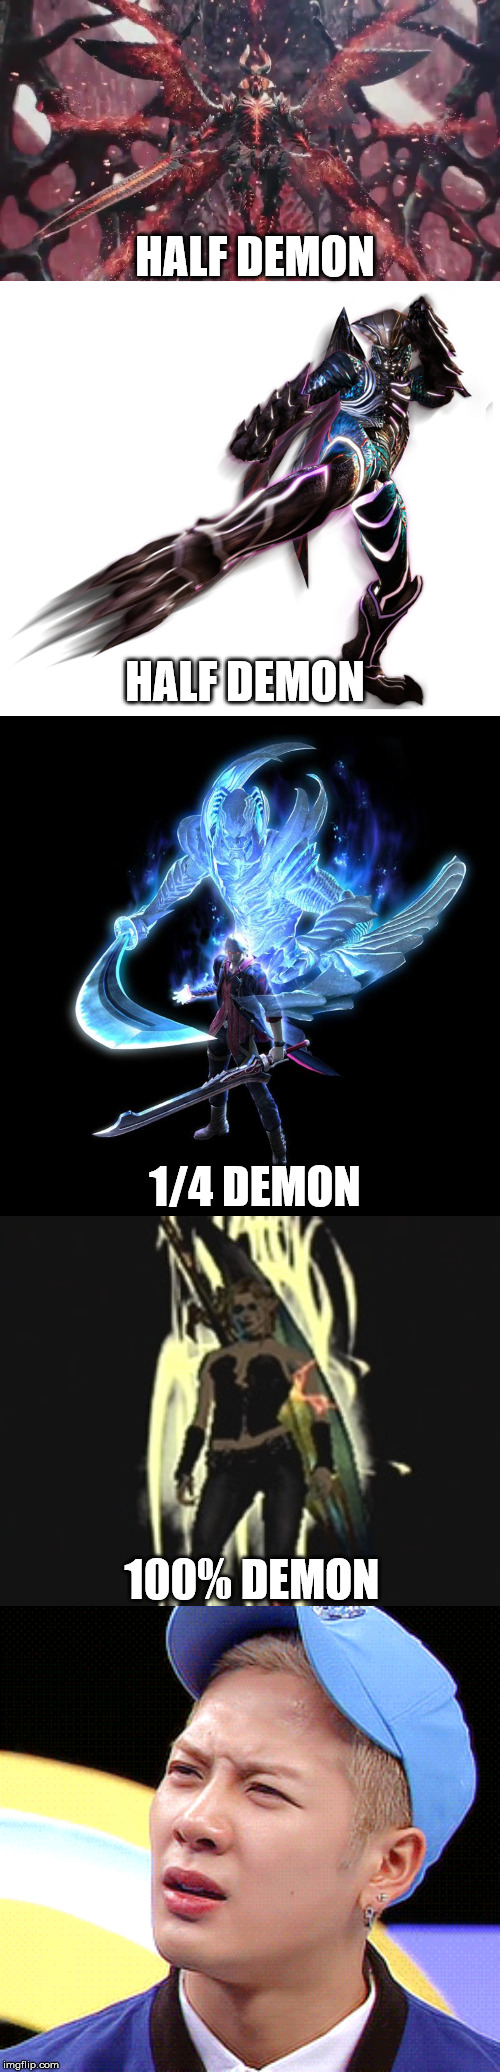 the logic behind devil trigger...when it comes to how much it changes your appearance makes no sense  | HALF DEMON; HALF DEMON; 1/4 DEMON; 100% DEMON | image tagged in truth,devil may cry,funny,confused,DevilMayCry | made w/ Imgflip meme maker